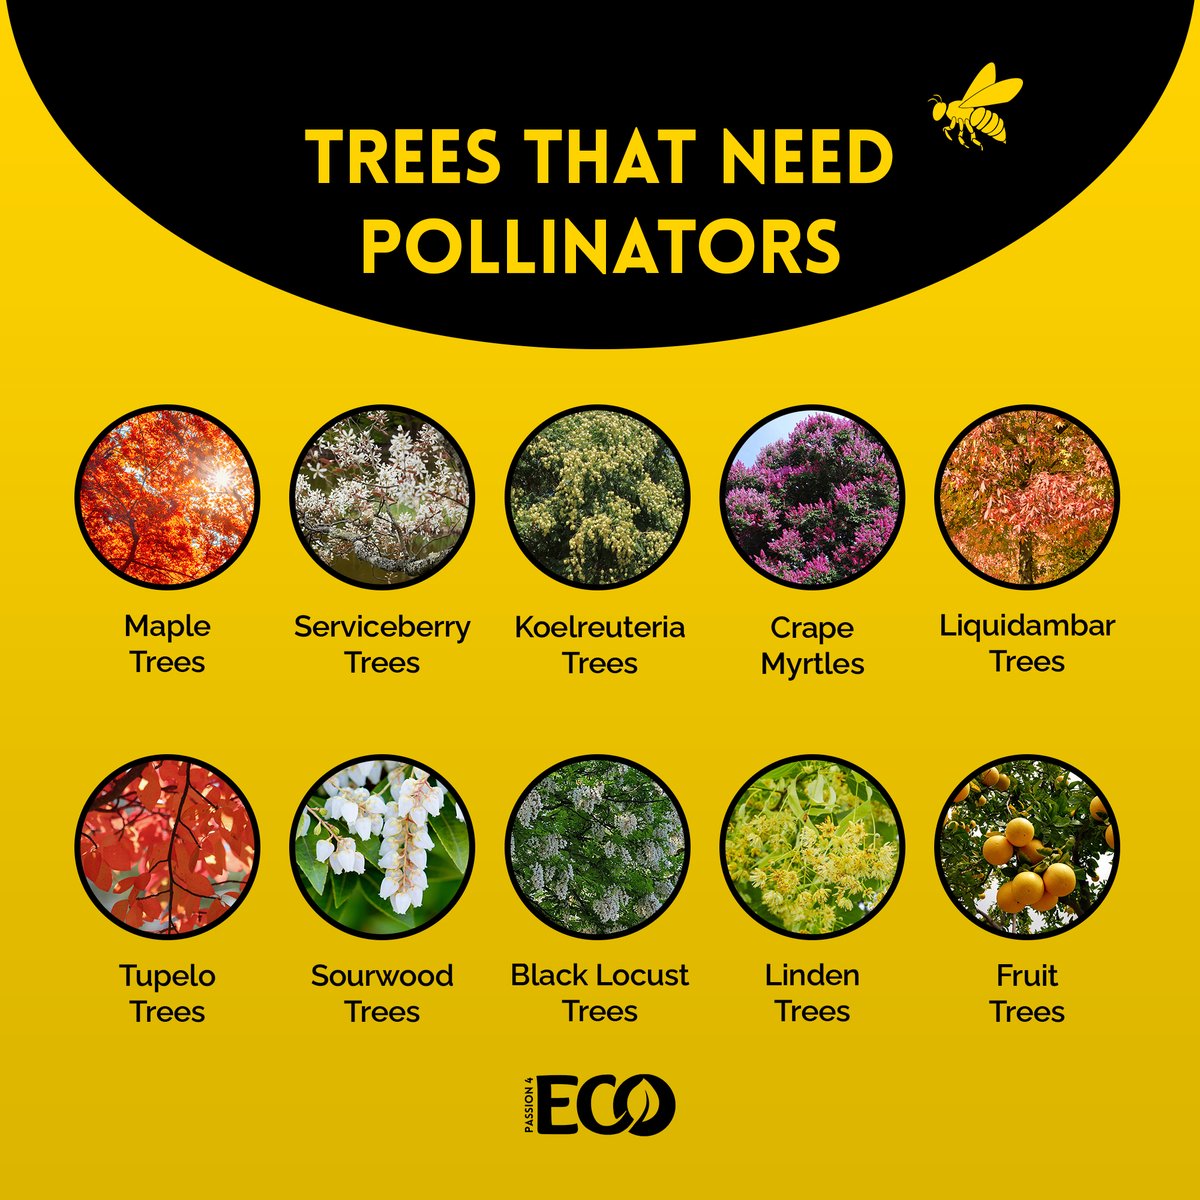 Pollinators are not only important to flowers, but also to trees! 🌳🐝

#Pollinators #EnvironmentalConservation #SaveTheBees